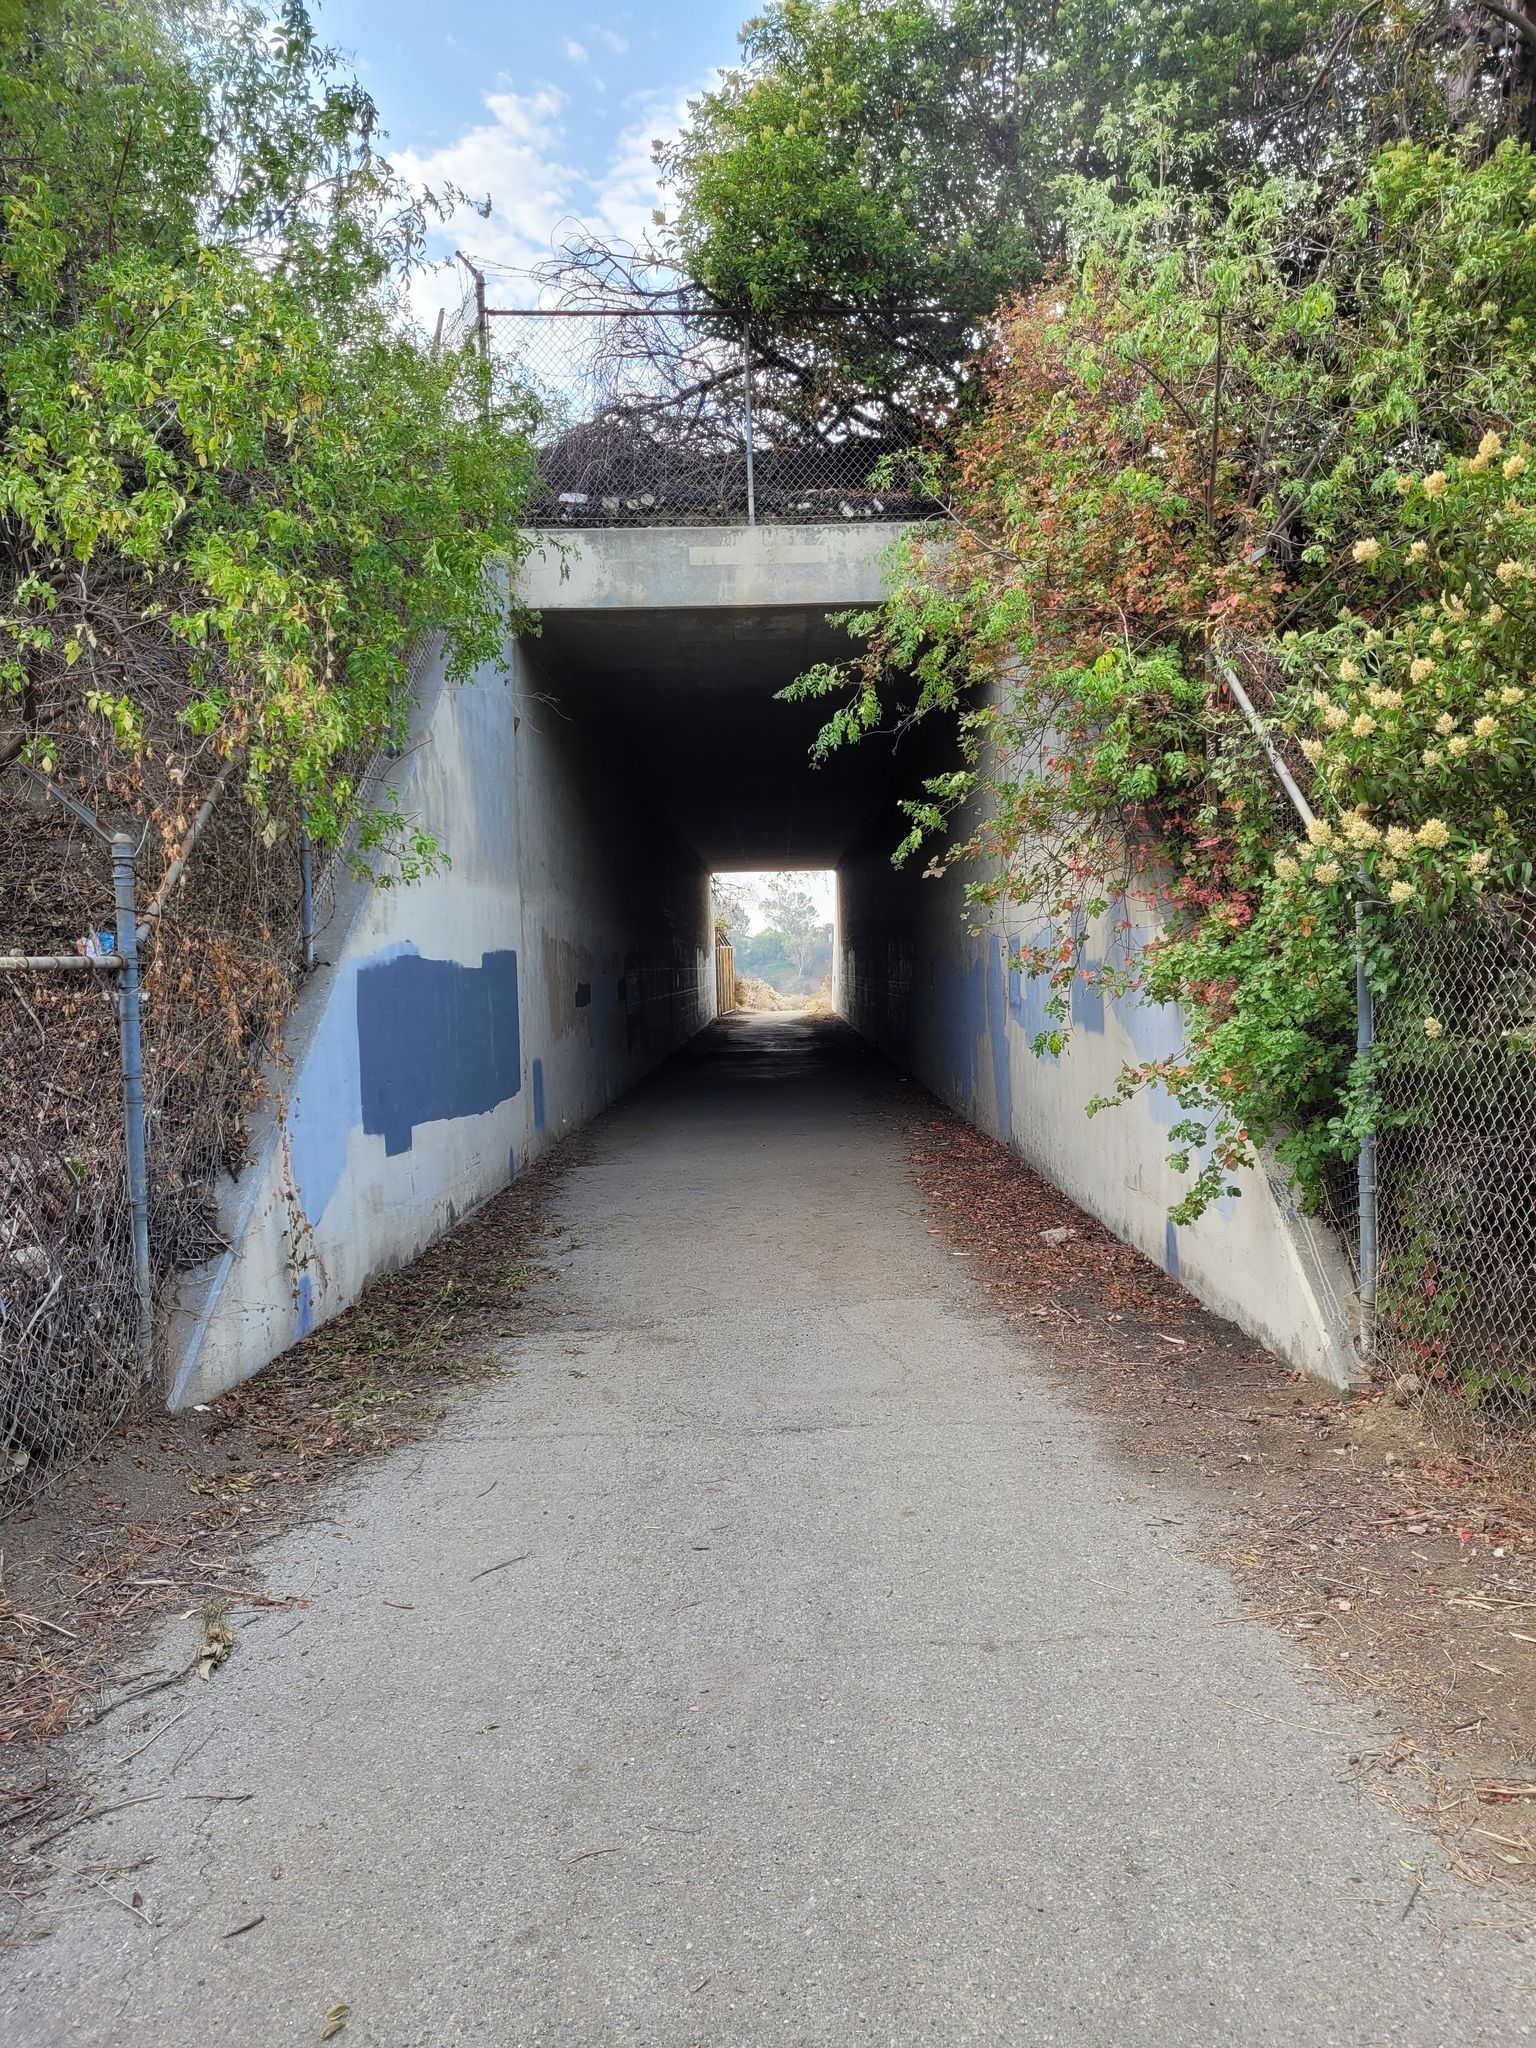 Quick tunnel for the Arroyo San Miguel Trail - one of the shorter Whittier hiking trails